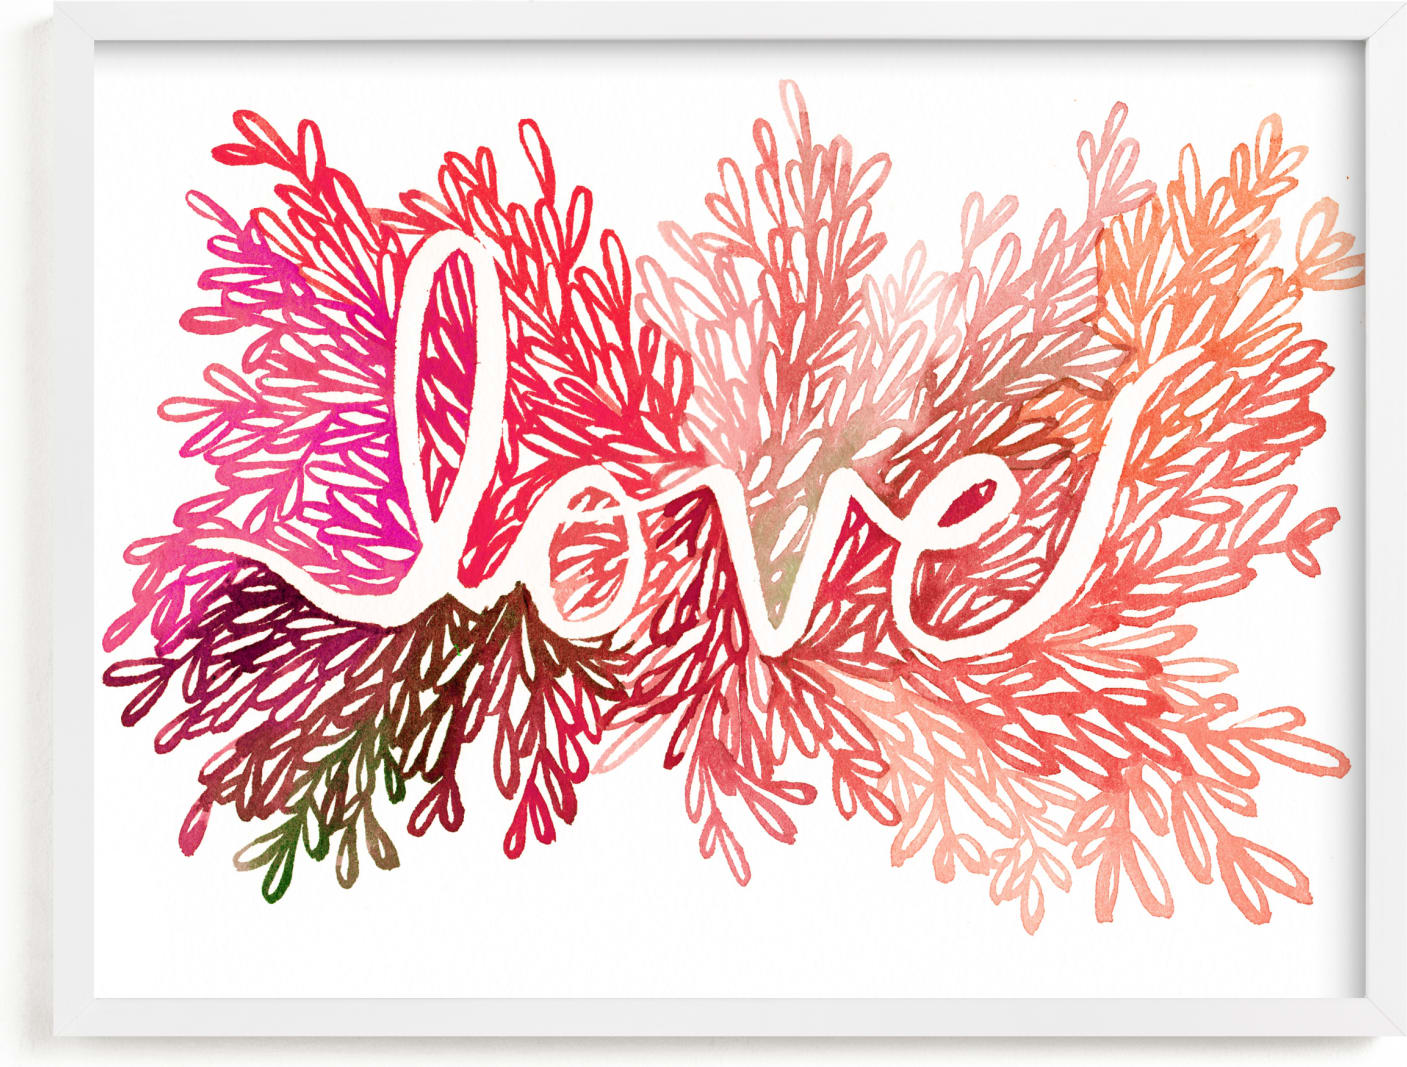 This is a colorful art by Kelly Ventura called Love.